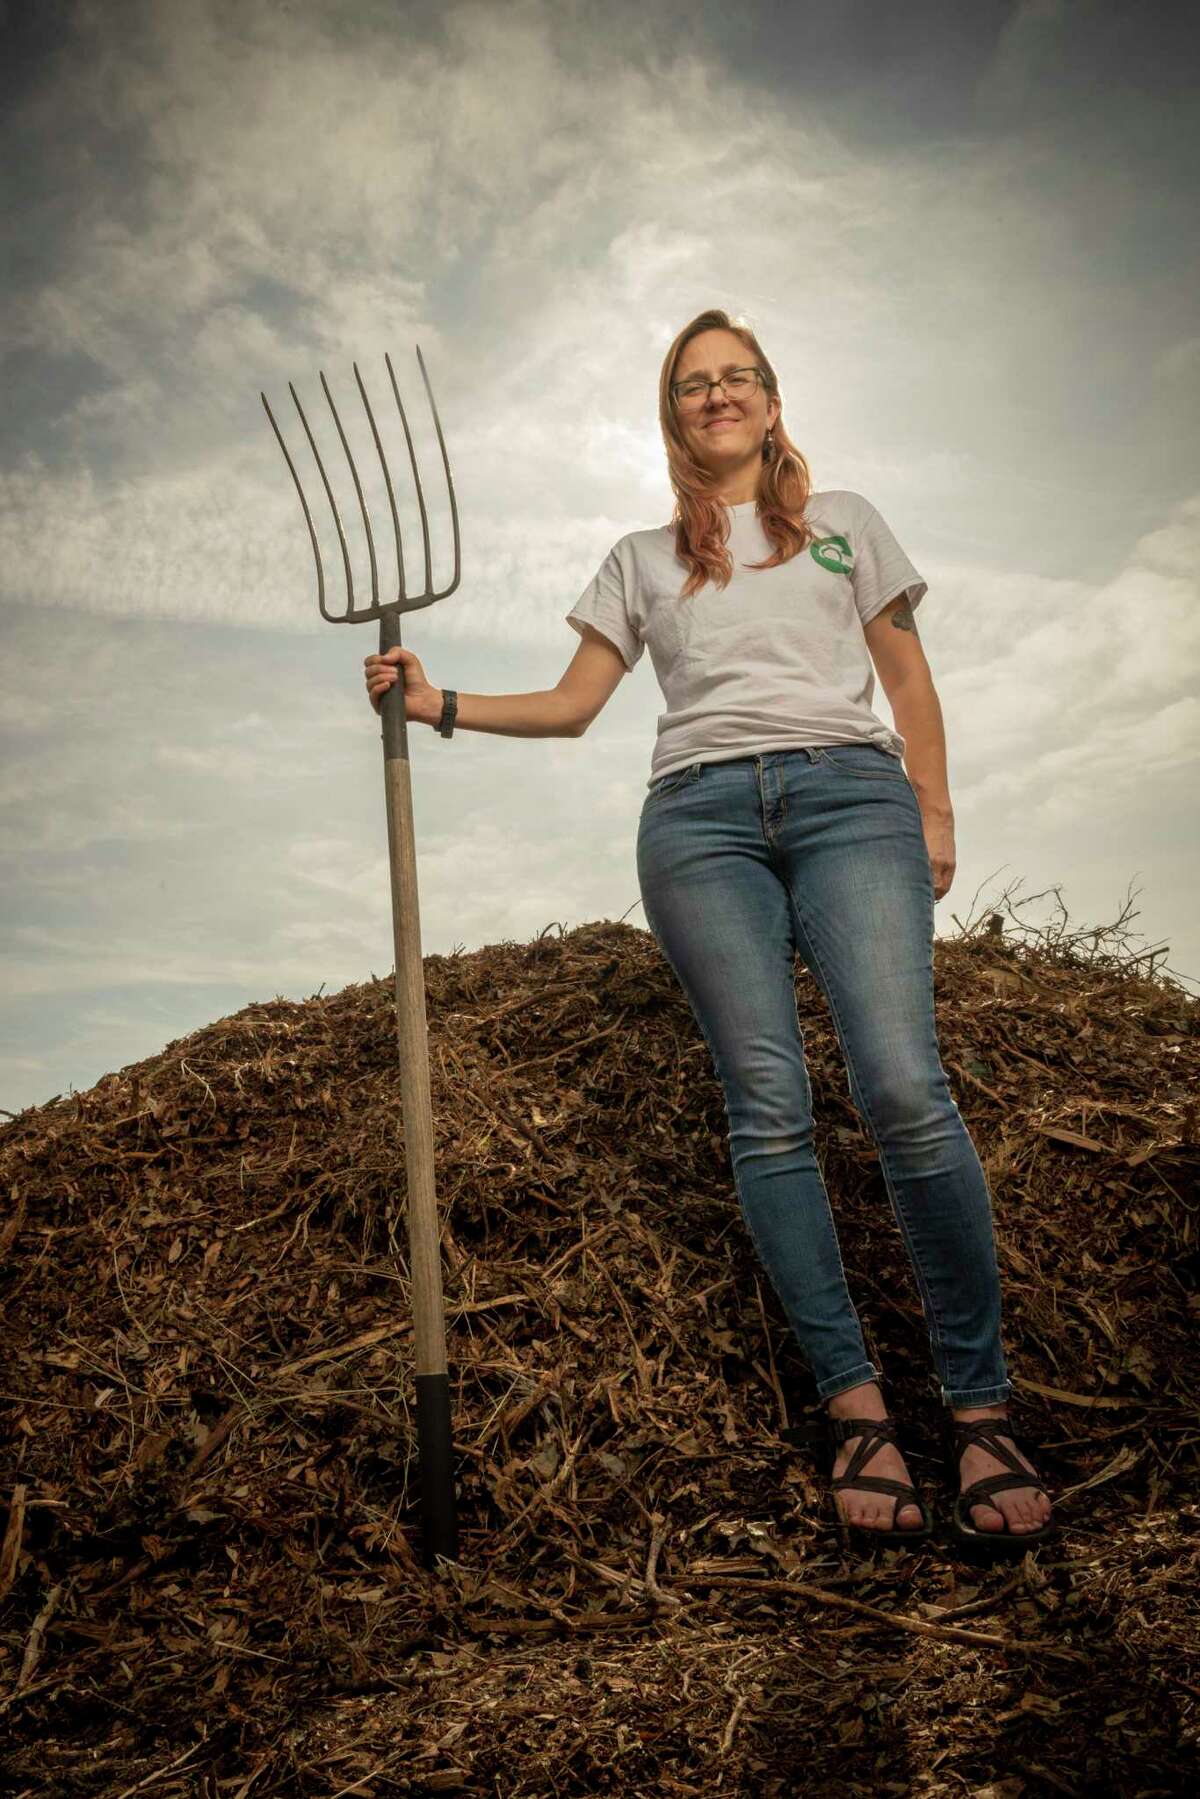 Kate Jaceldo and Betsy Gruy (not shown) have made a business out of taking food scraps from restaurants and residents, then using it to cultivate compost.